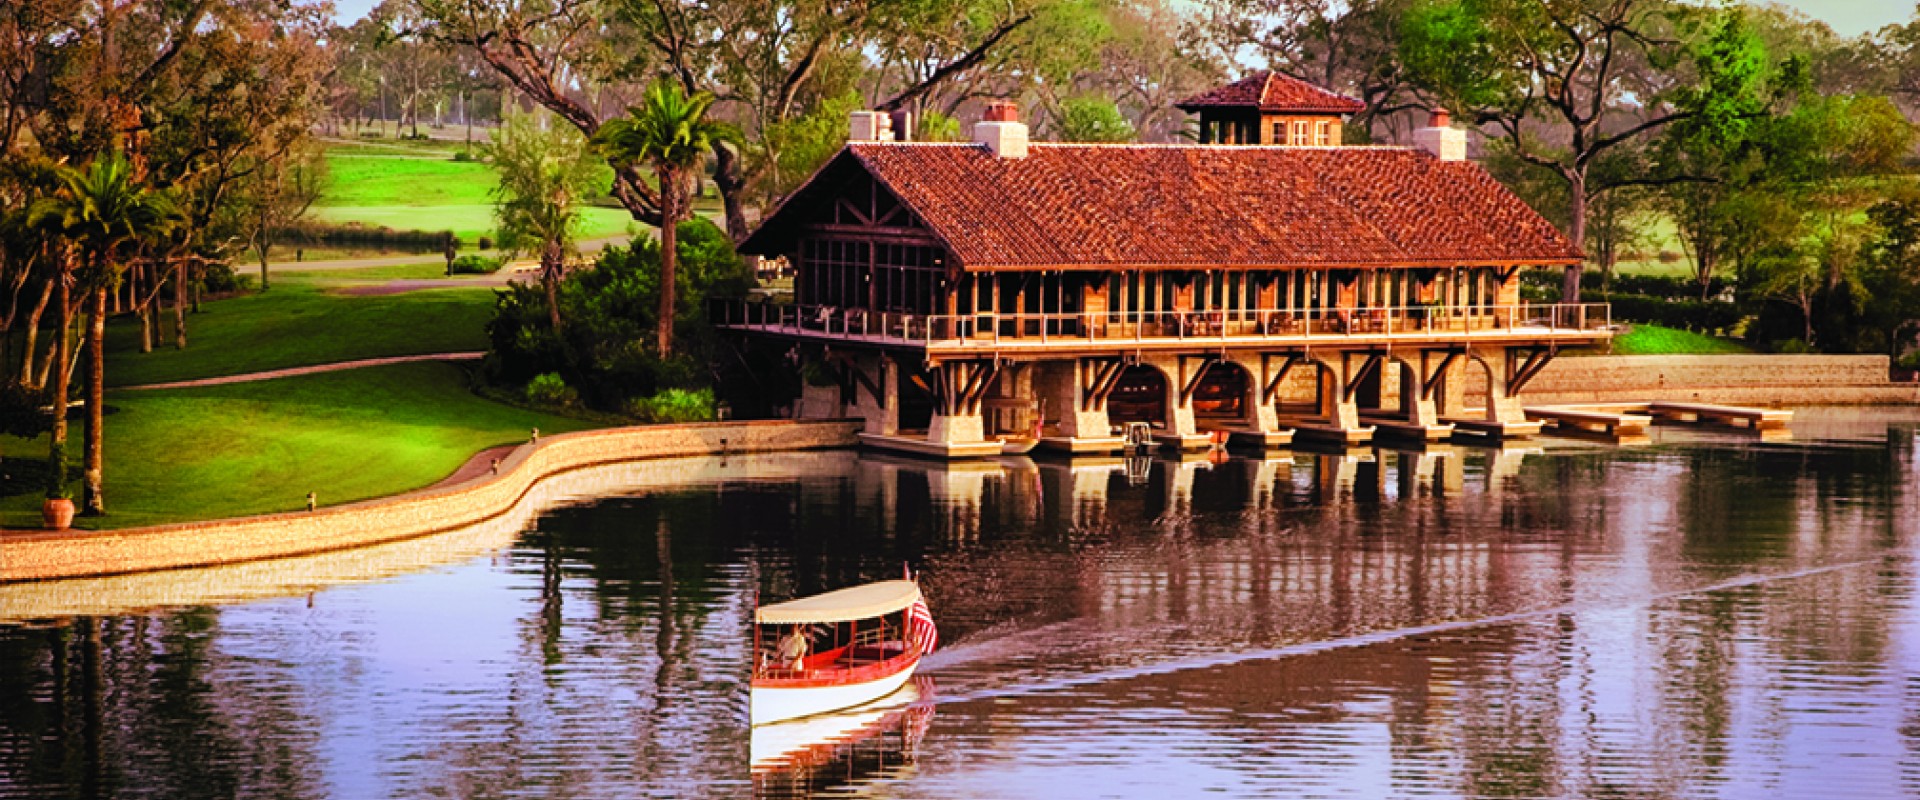 The Frederica Boathouse